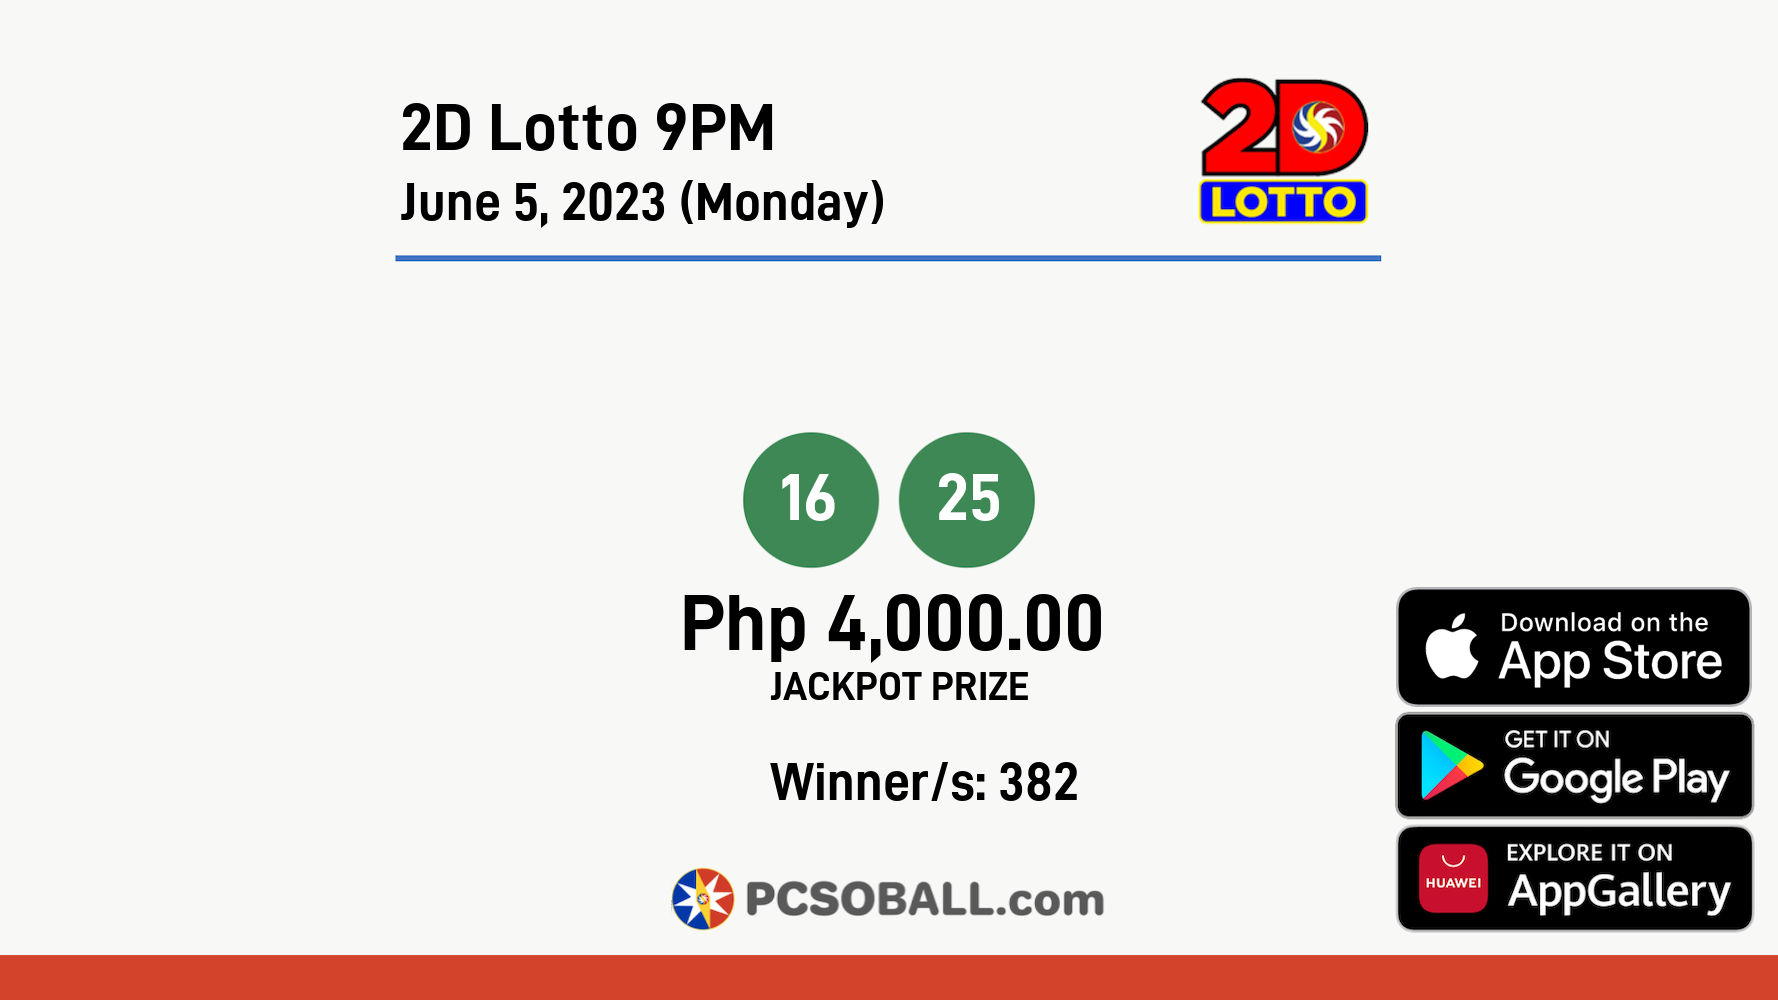 2D Lotto 9PM June 5, 2023 (Monday) Result